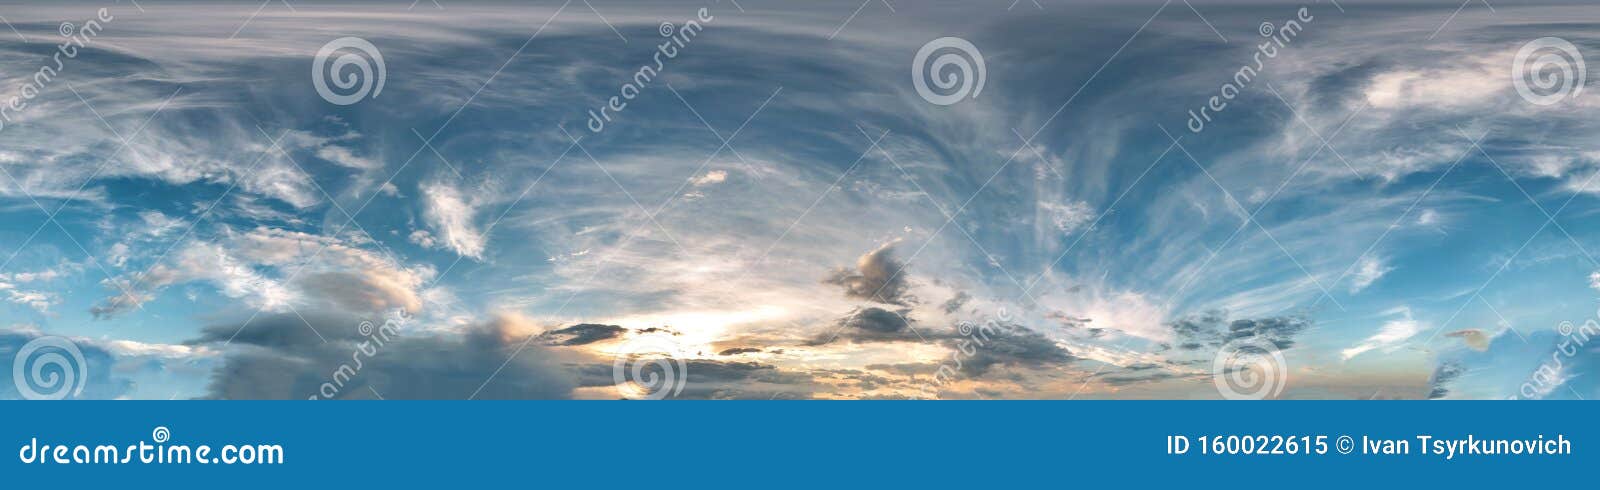 seamless cloudy blue sky hdri panorama 360 degrees angle view with zenith and beautiful clouds for use in 3d graphics as sky dome